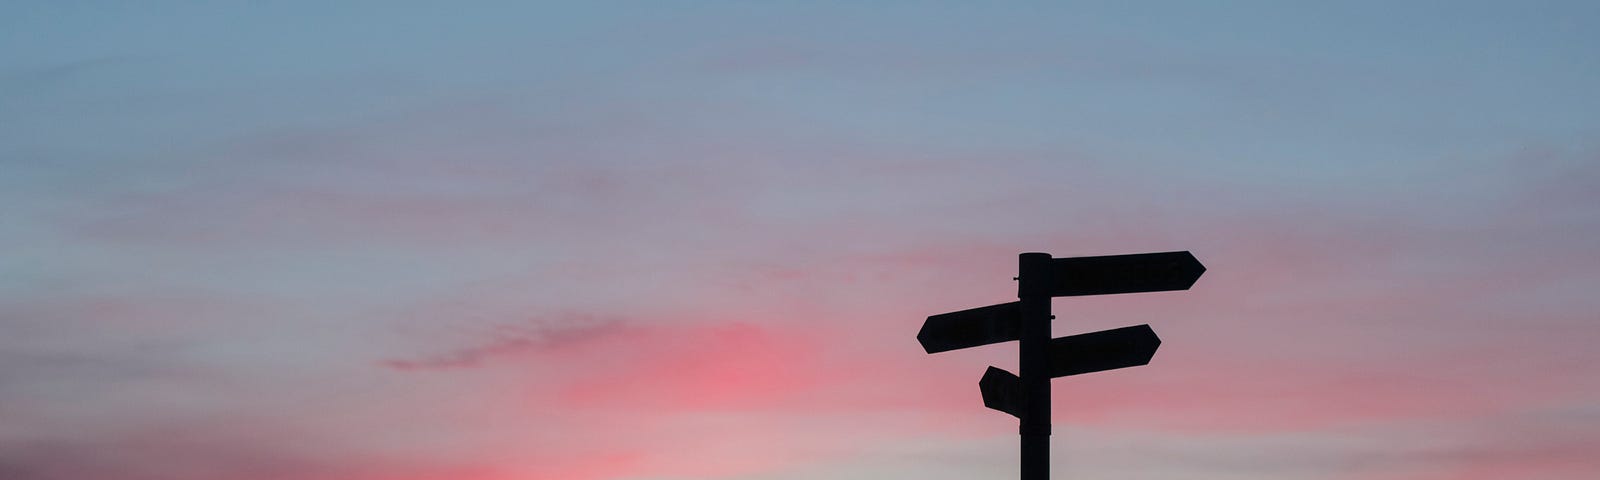 A signpost against a sunset sky